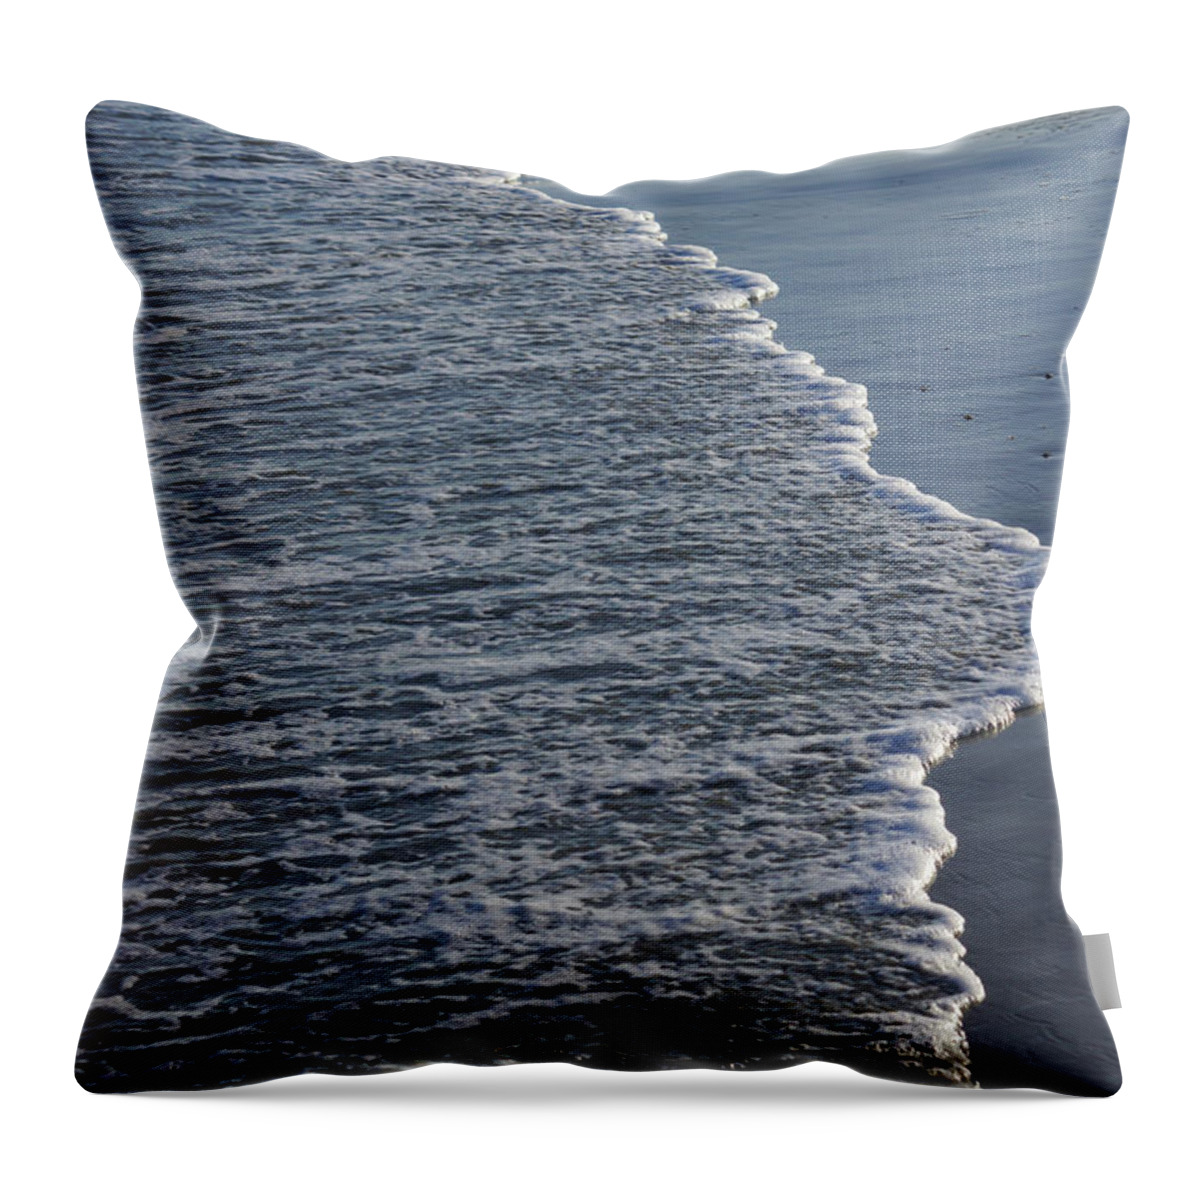 Cocoa Beach Throw Pillow featuring the photograph Shoreline Beauty by Jennifer White